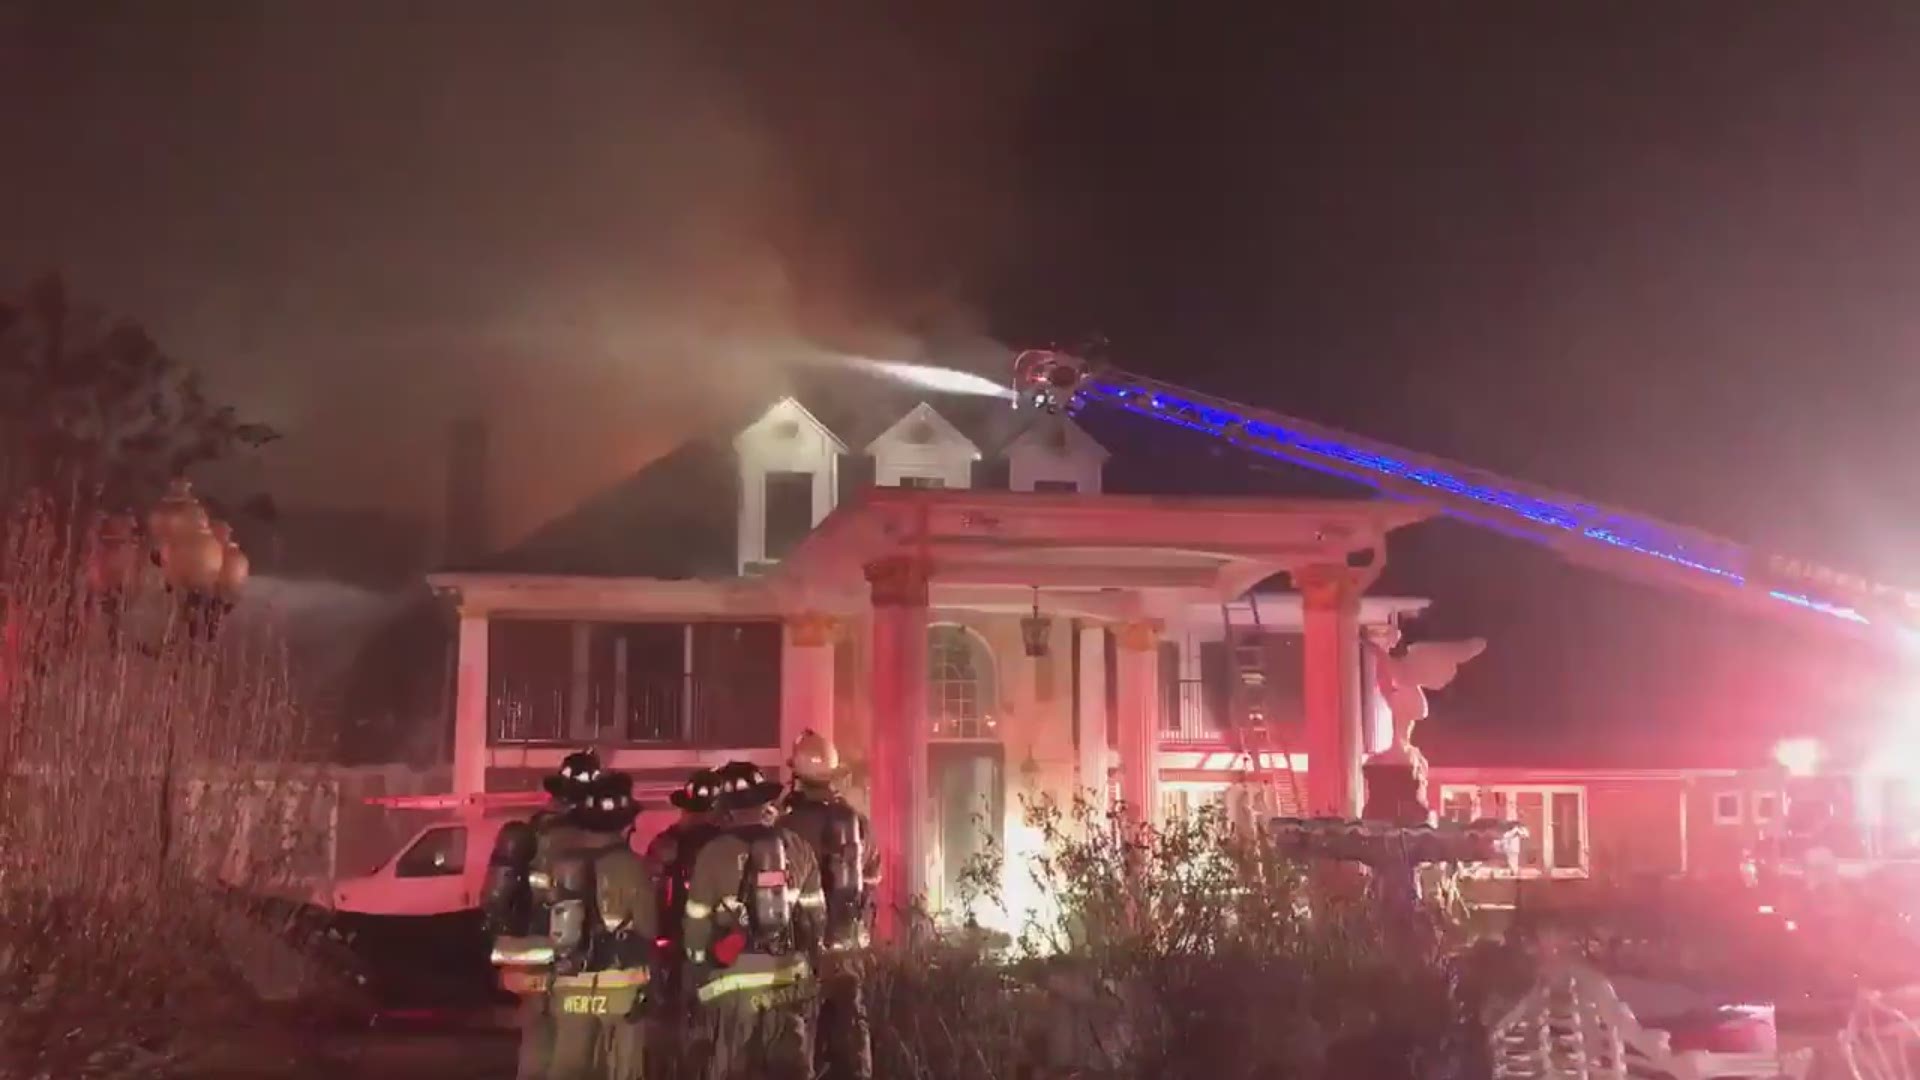 A large number of fire crews responded to a blaze in McLean, Virginia, that at one point had flames coming through the roof.